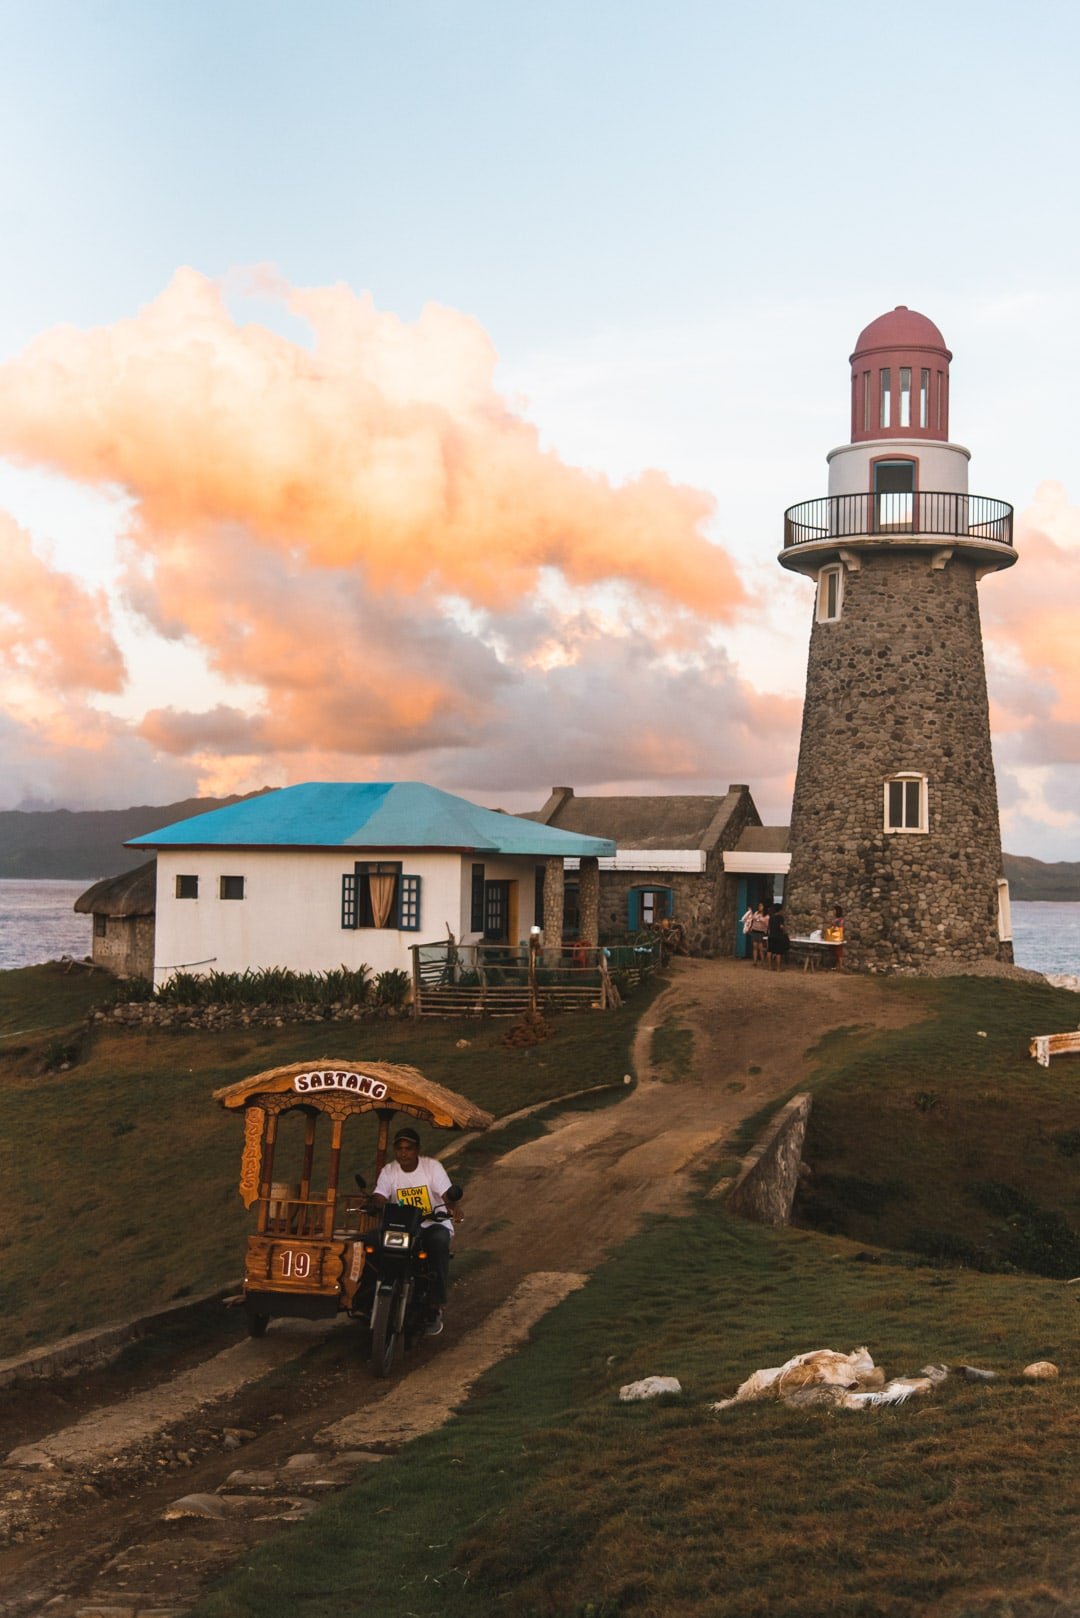 batanes itinerary, batanes travel itinerary, Transportation around Batanes, Batanes tourist spots, atms in batanes, wifi connection in batanes, how to go to Batanes, Sabtang lighthouse